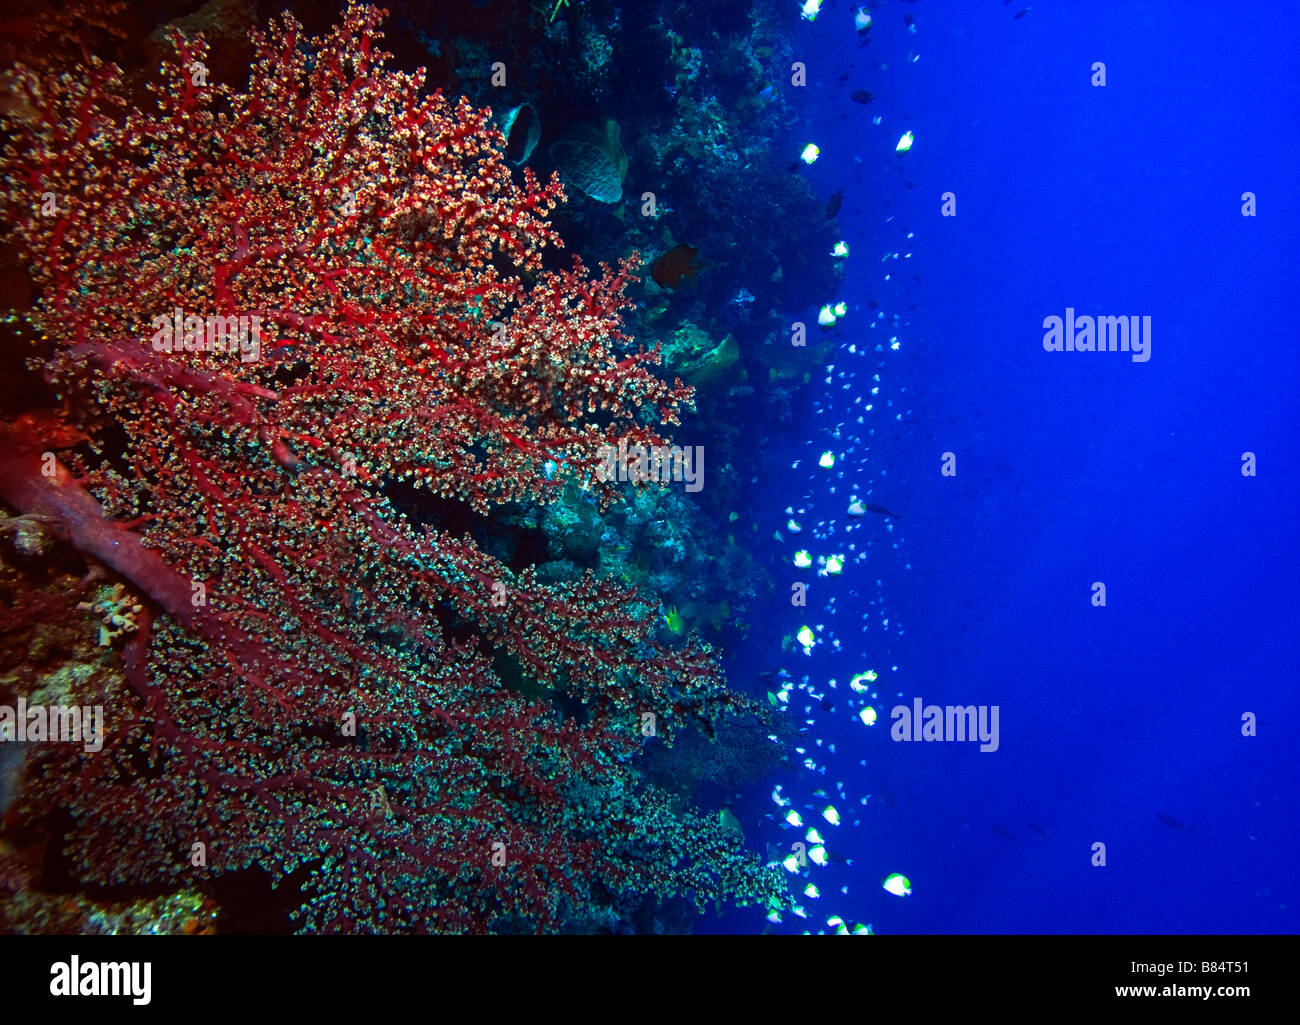 Gorgonian sea fan on coral reef feeding in the gentle current Stock Photo